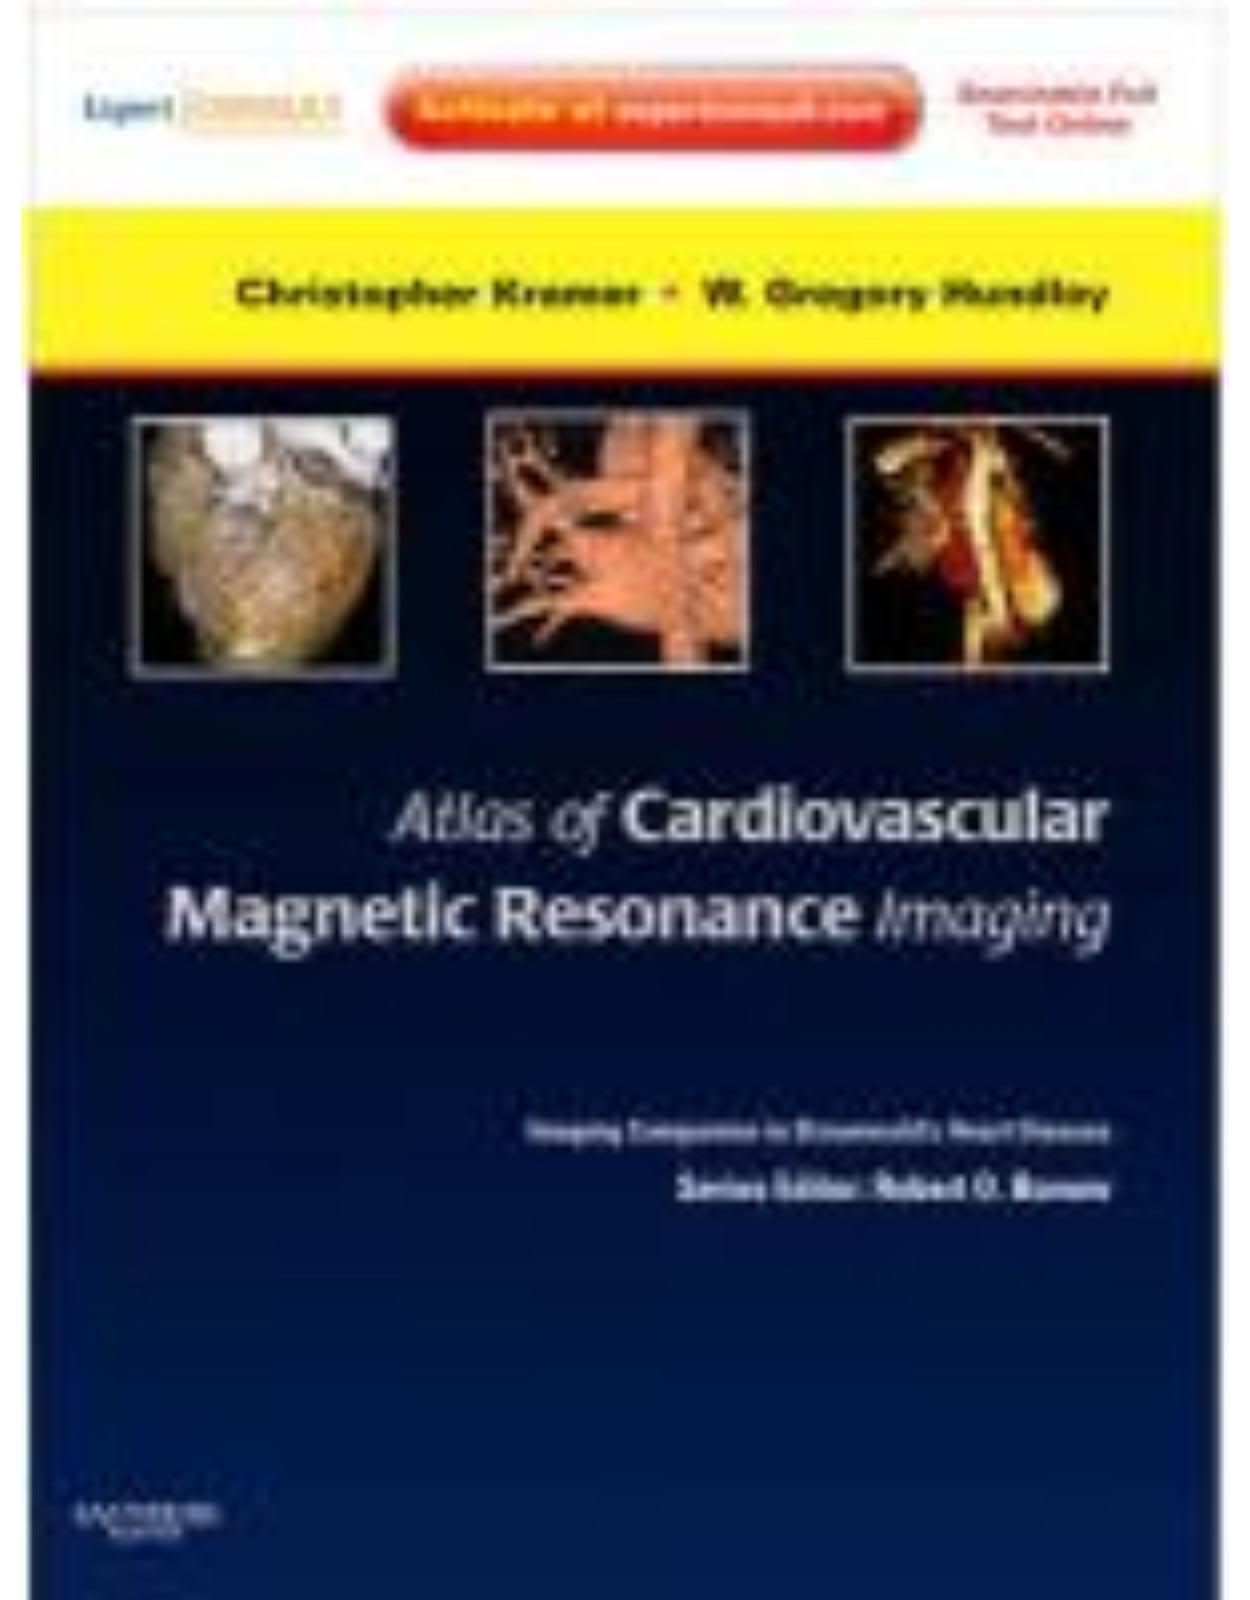 Atlas of Cardiovascular Magnetic Resonance Imaging: Expert Consult - Online and Print: Imaging Companion to Braunwald's Heart Disease